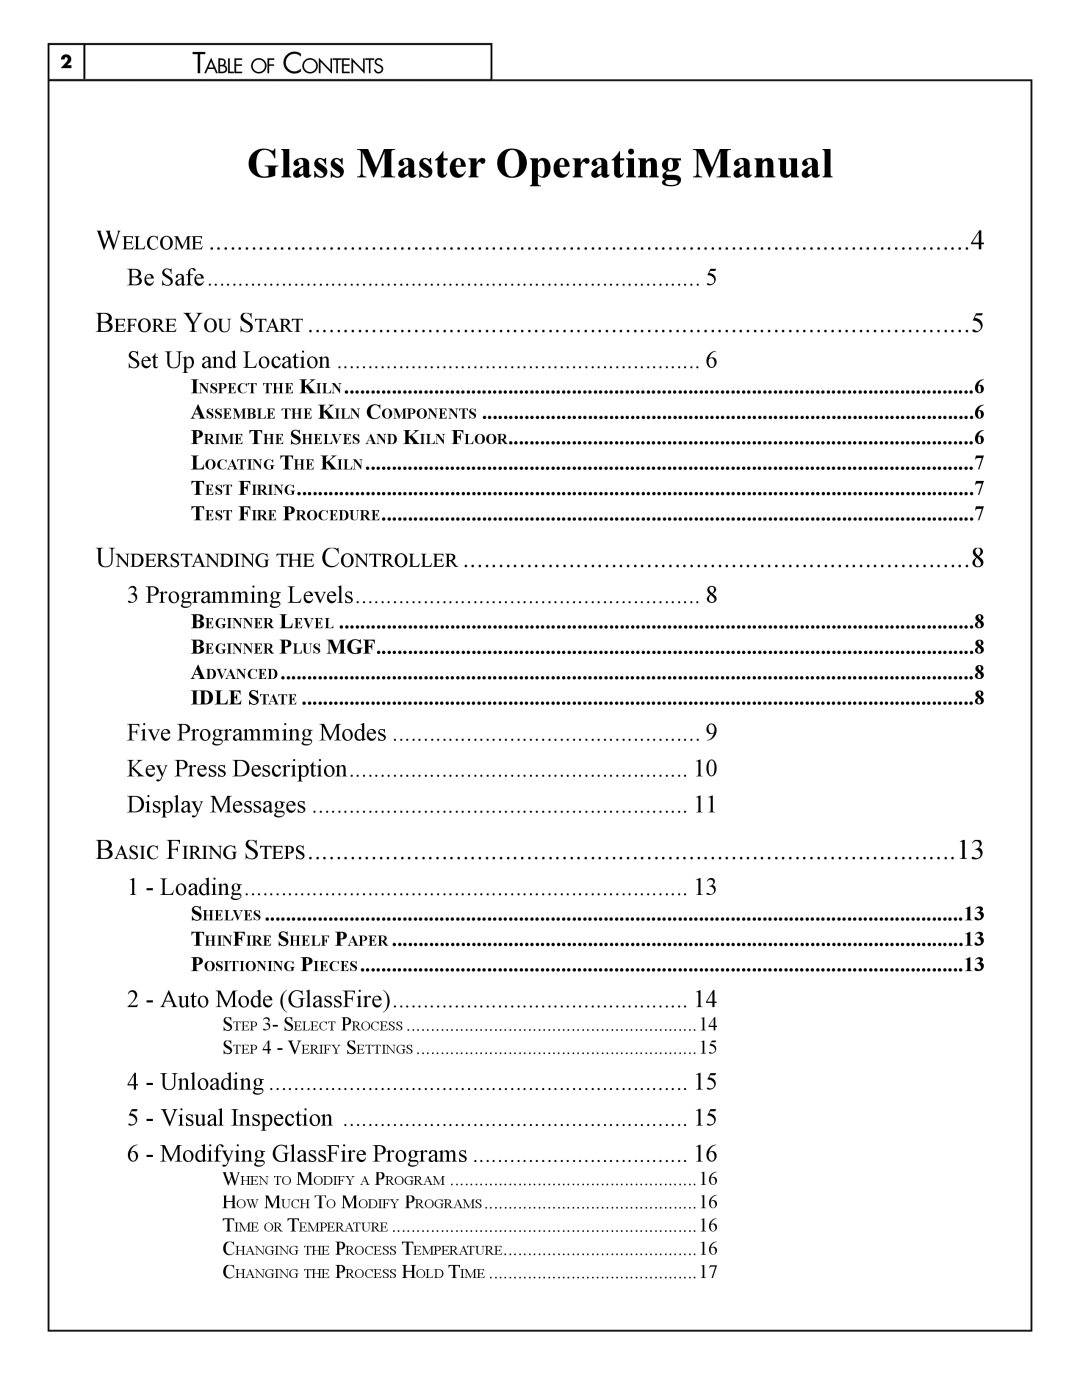 Skuttle Indoor Air Quality Products Klin manual Glass Master Operating Manual 